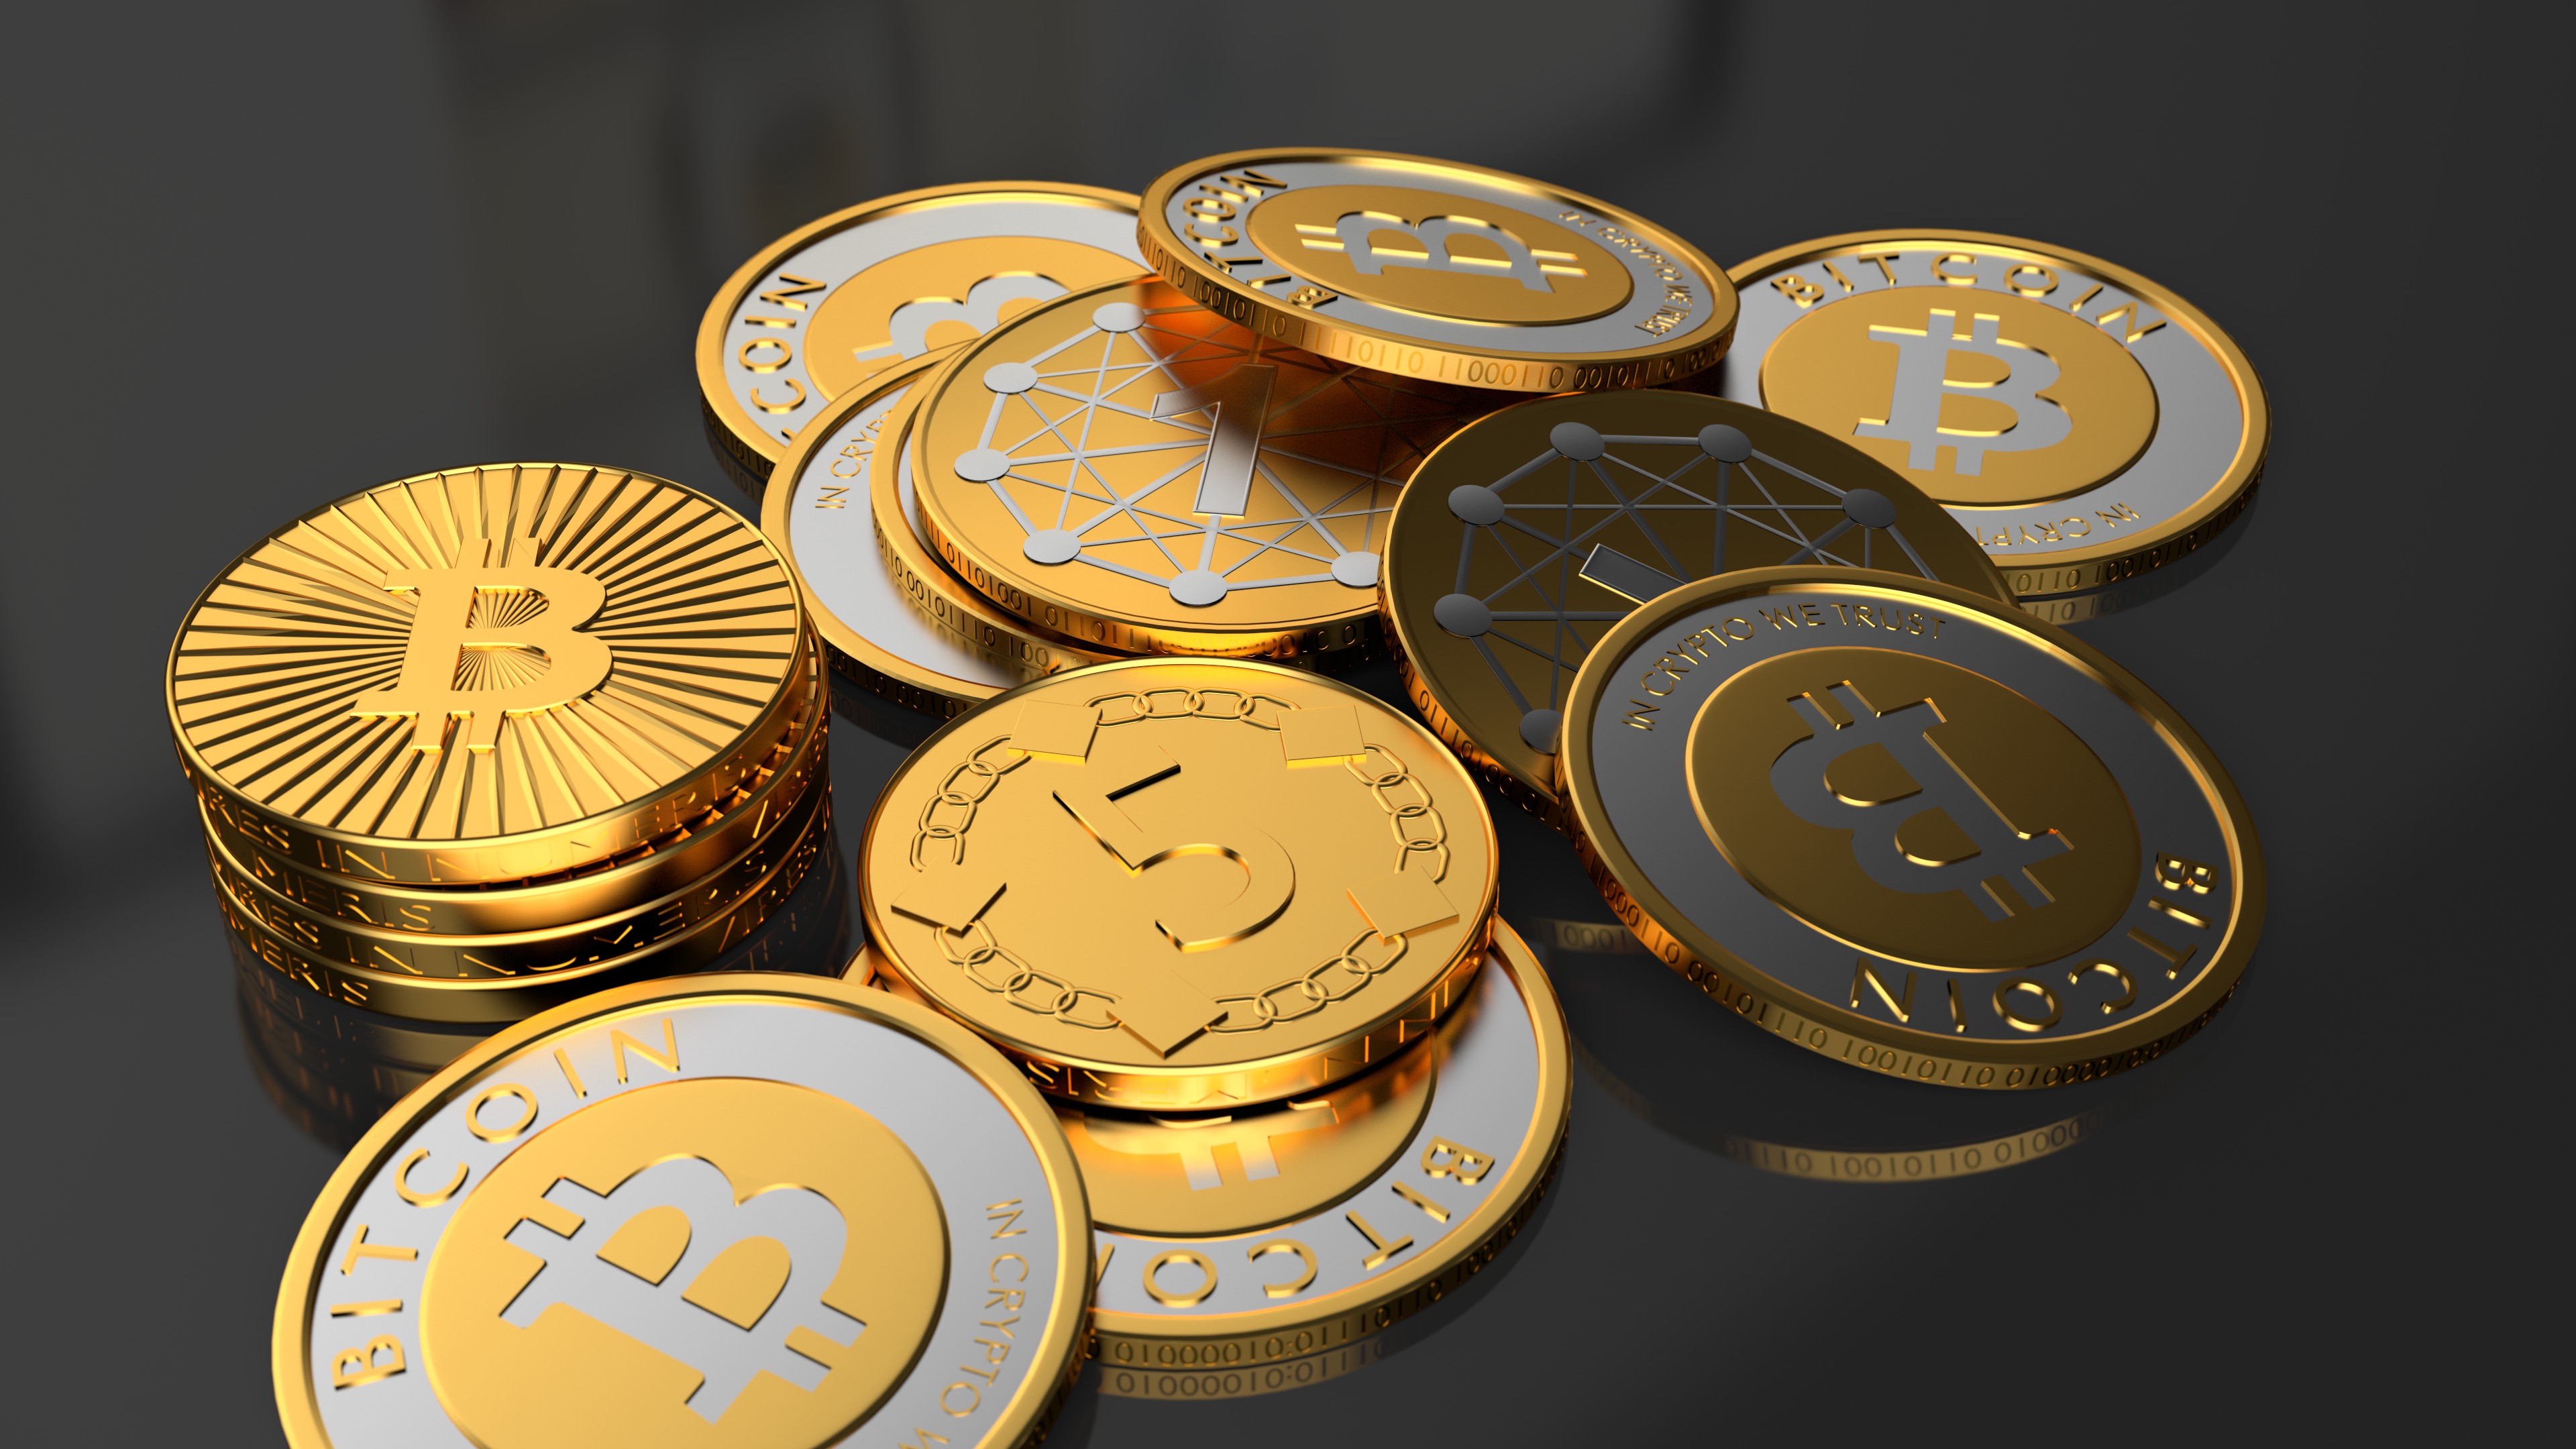 Bitcoin, Currency, Money Wallpaper